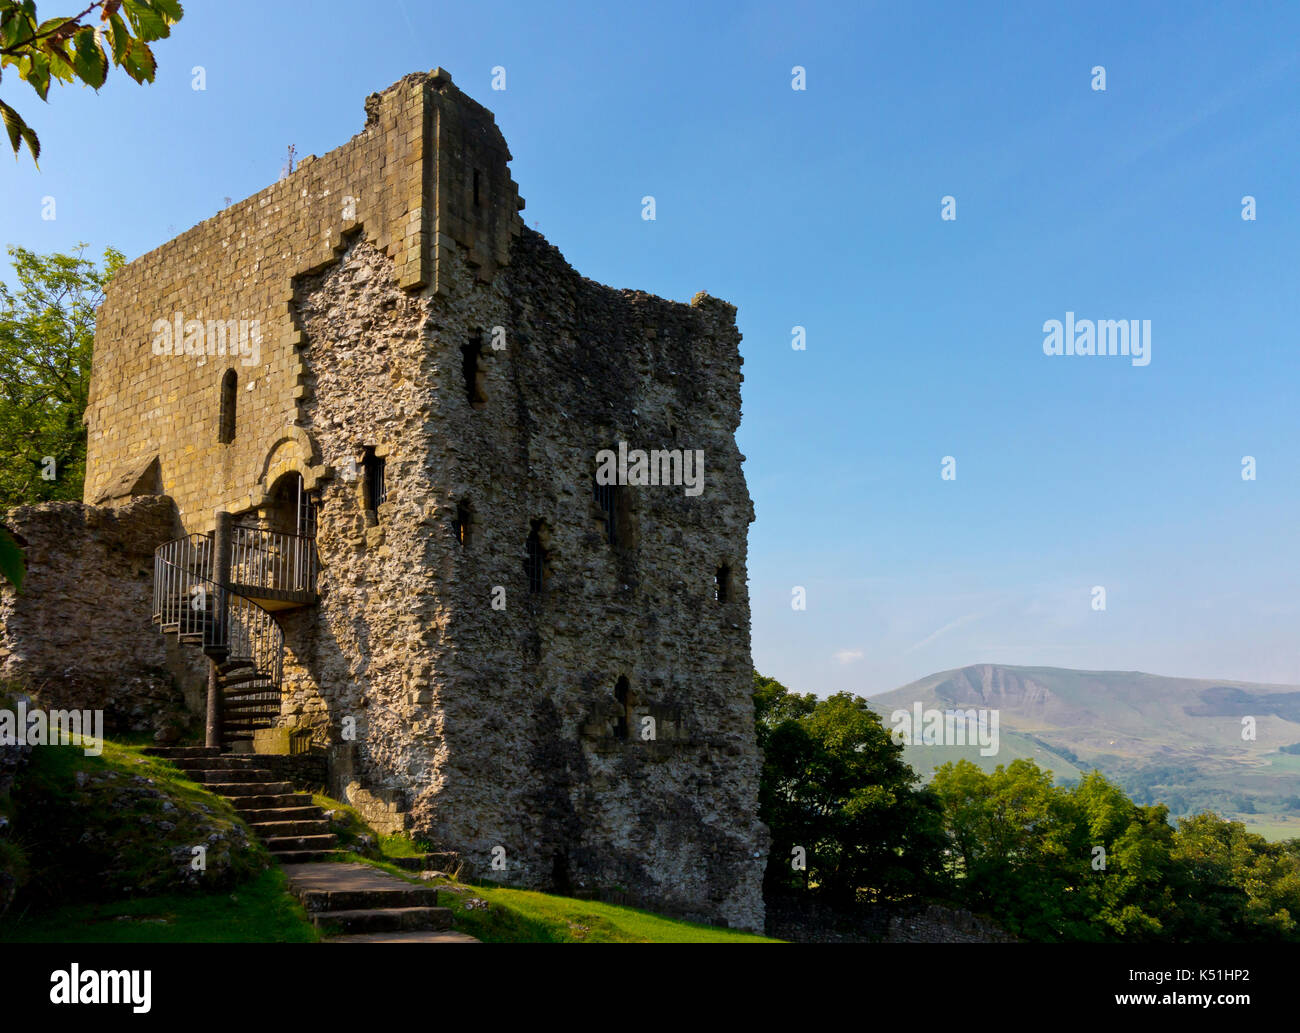 Peveril Castle a ruined 11th century castle overlooking the village of Castleton in the Derbyshire Peak District England UK Stock Photo